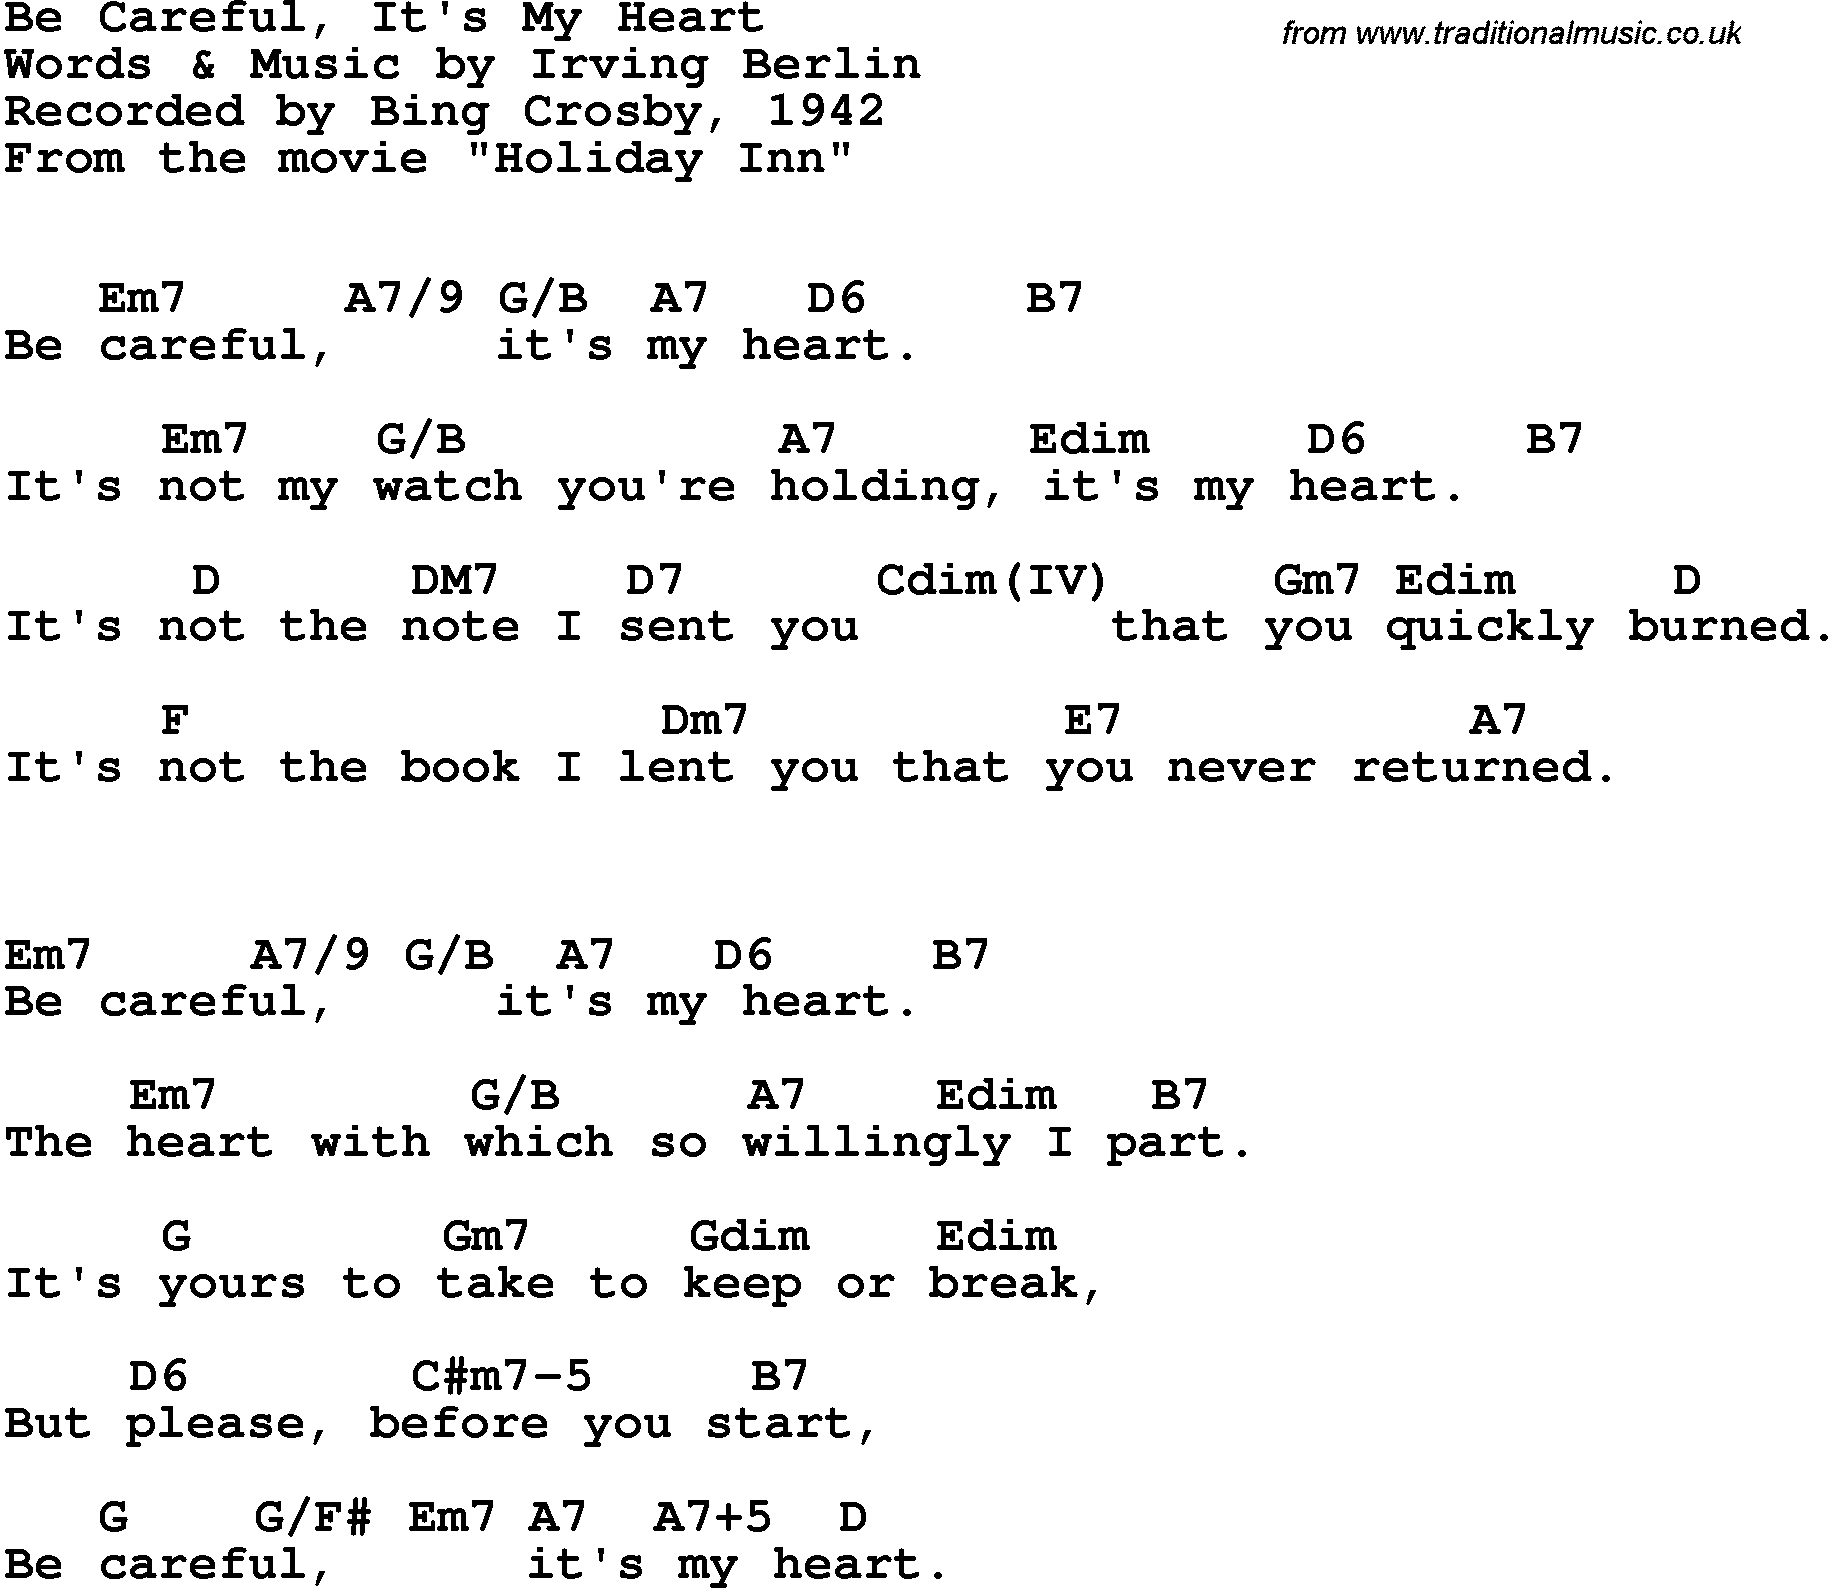 Song Lyrics with guitar chords for Be Careful It's My Heart - Bing Crosby, 1942